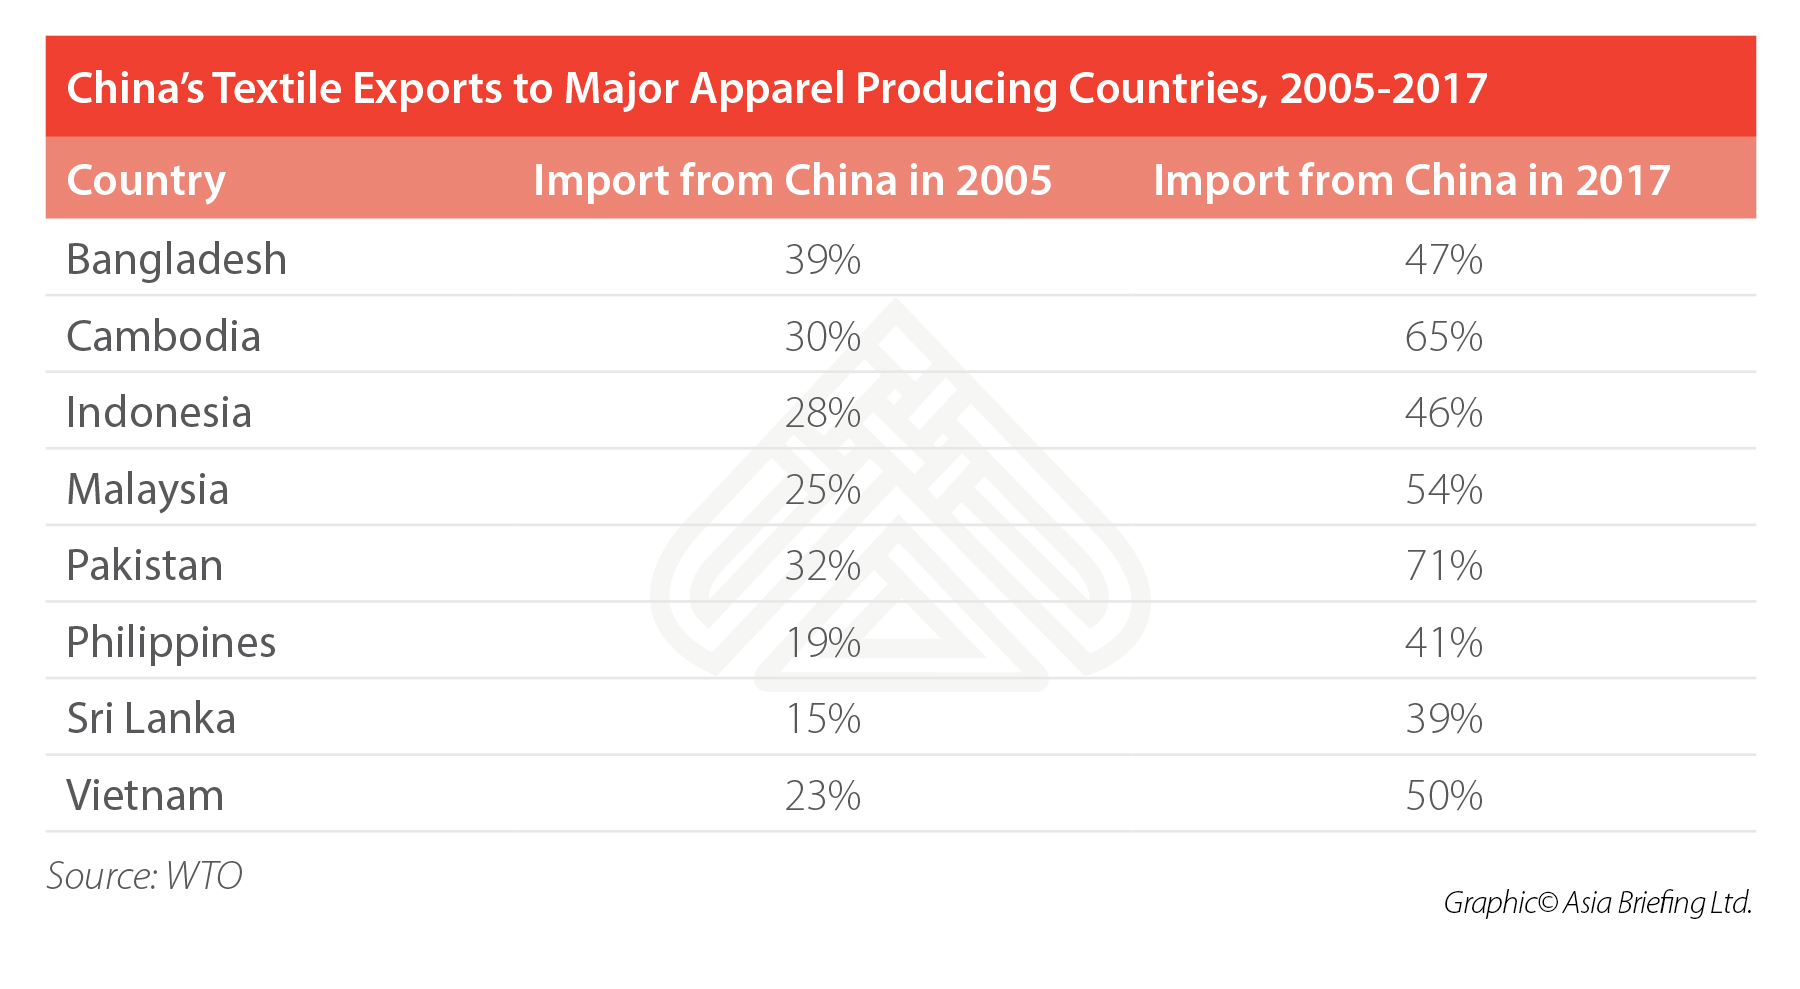 China’s Textile Exports